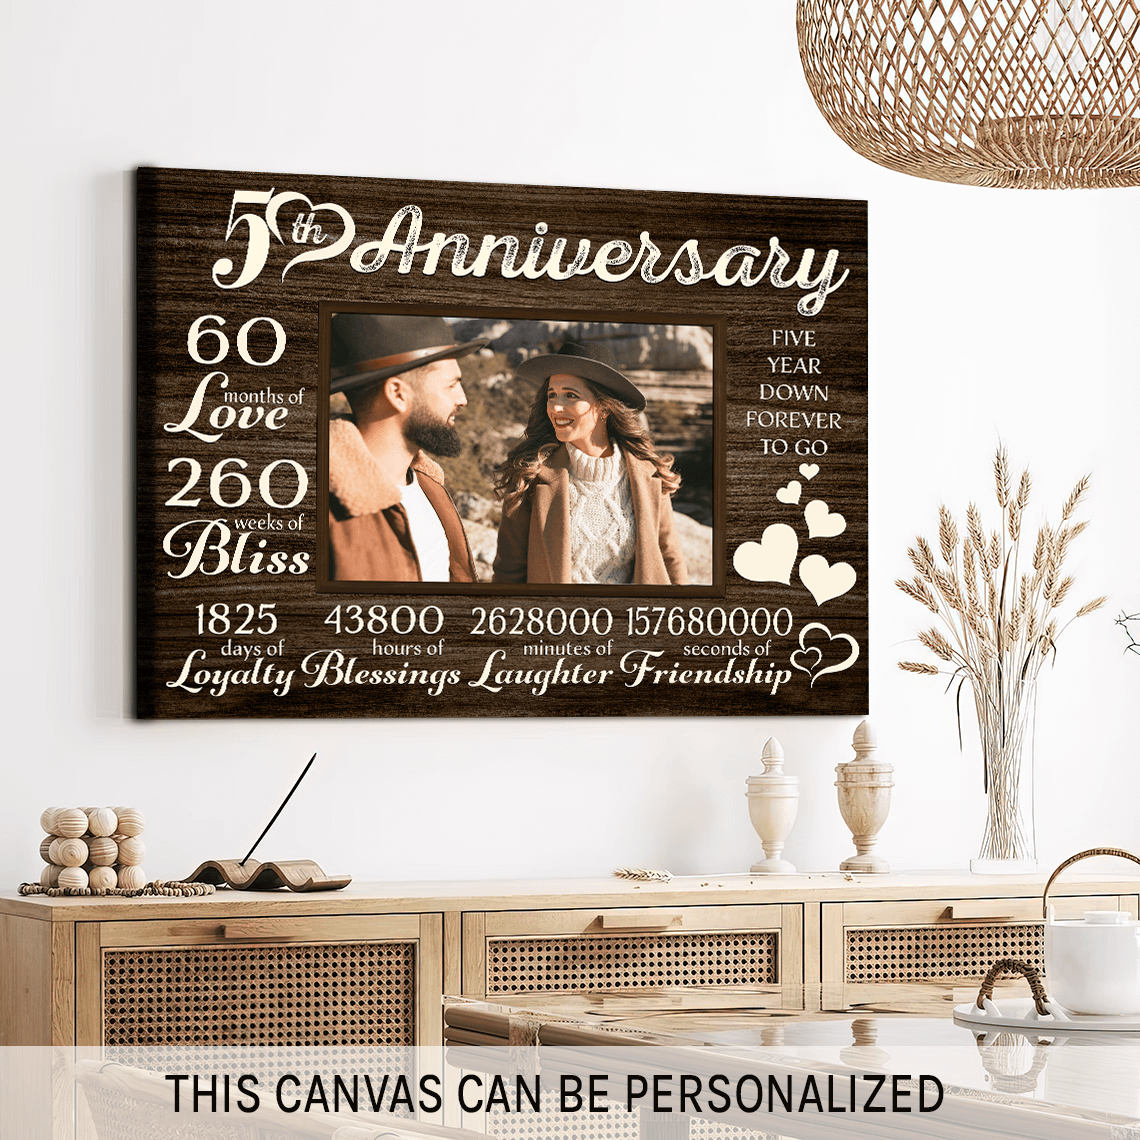 Personalized 5 year anniversary gift for him for her - 60 months of love - custom Couple Canvas print - MyMindfulGifts